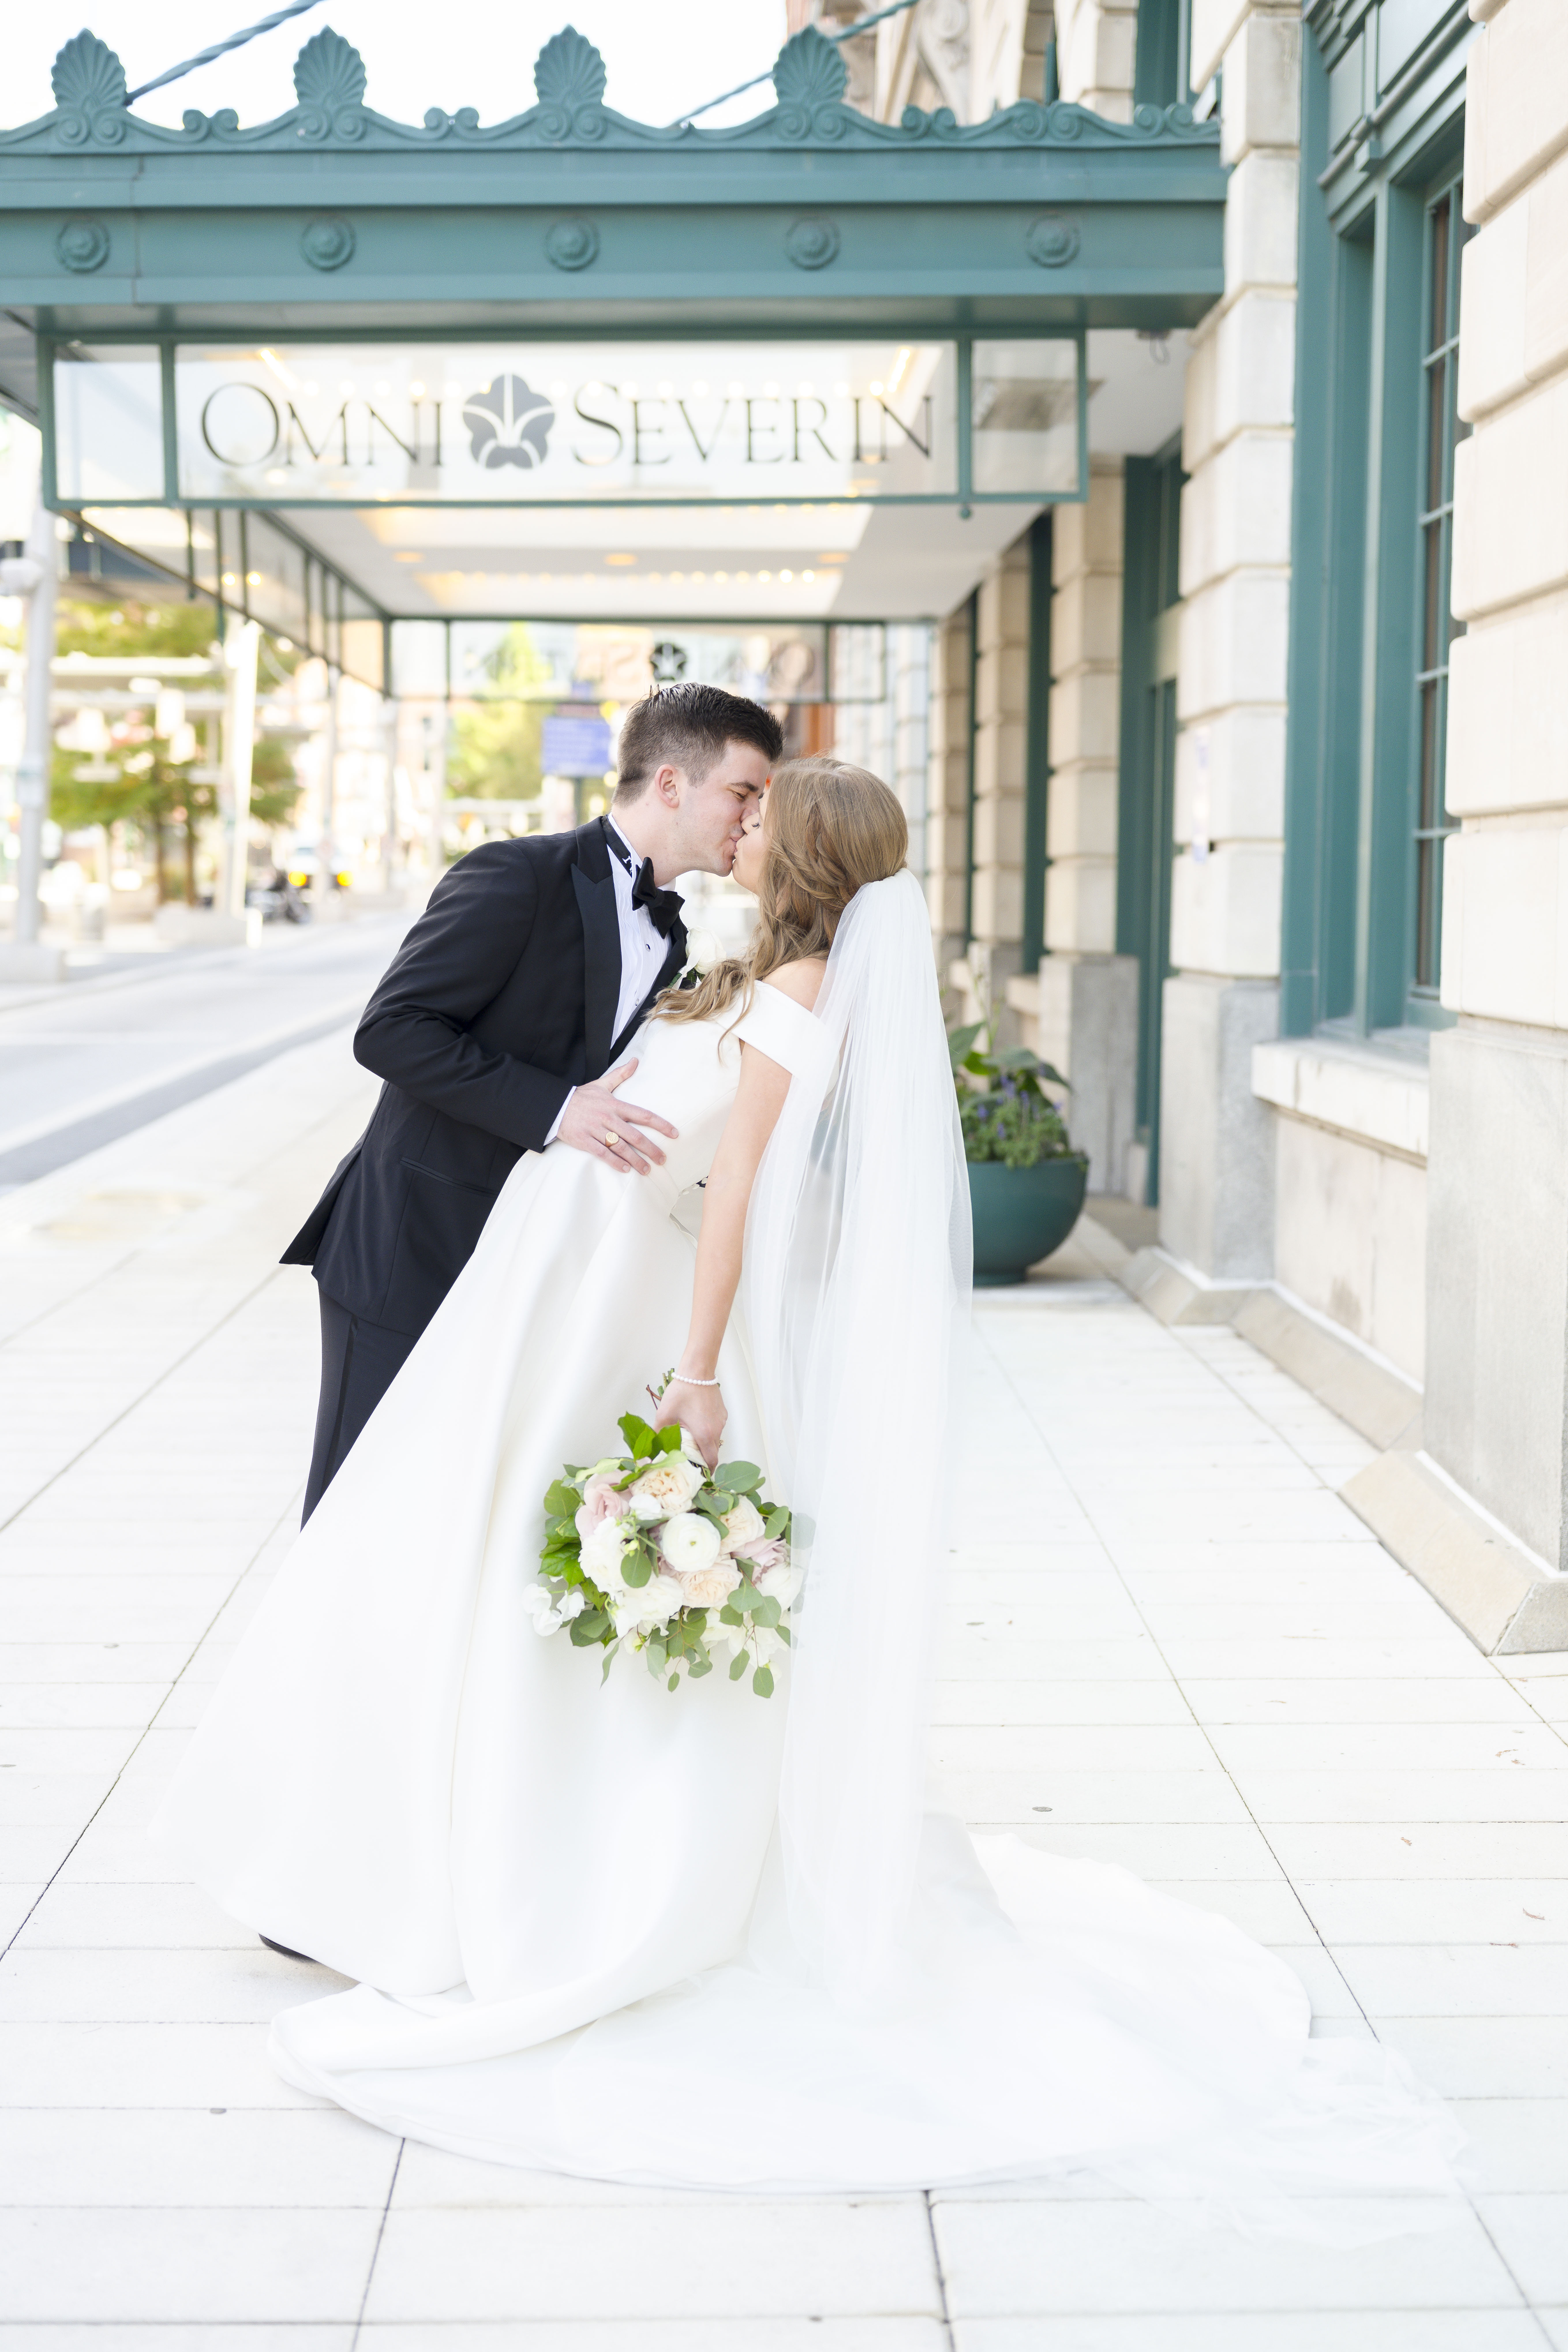 Omni Severin Hotel wedding in Downtown Indianapolis